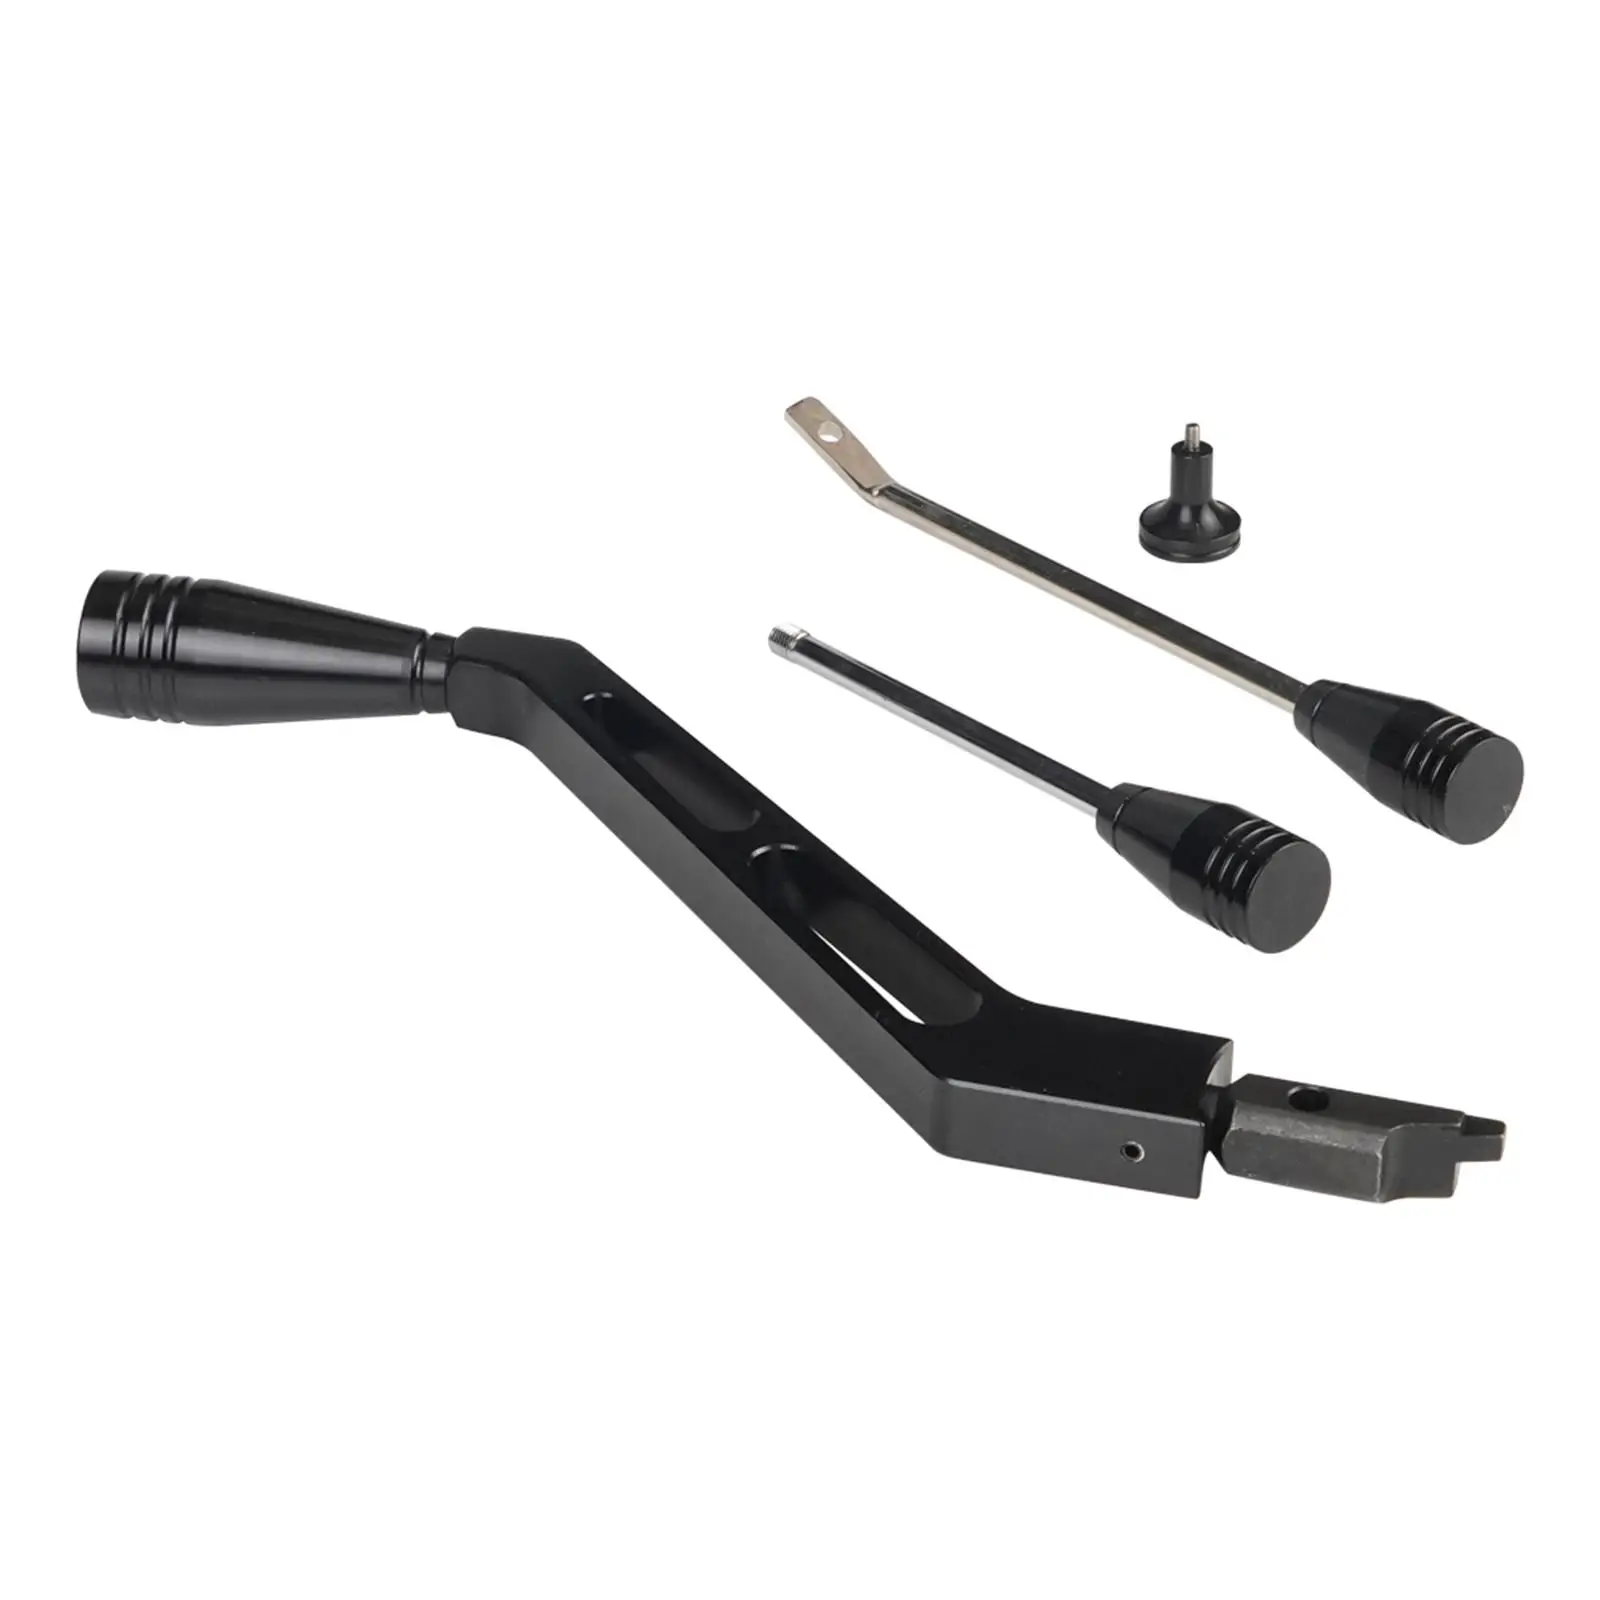 Shifter Lever Turn Signal Hazard Boots Tilt Fittings Easy to Install High Performance Replace for Columns 1967 - 1994